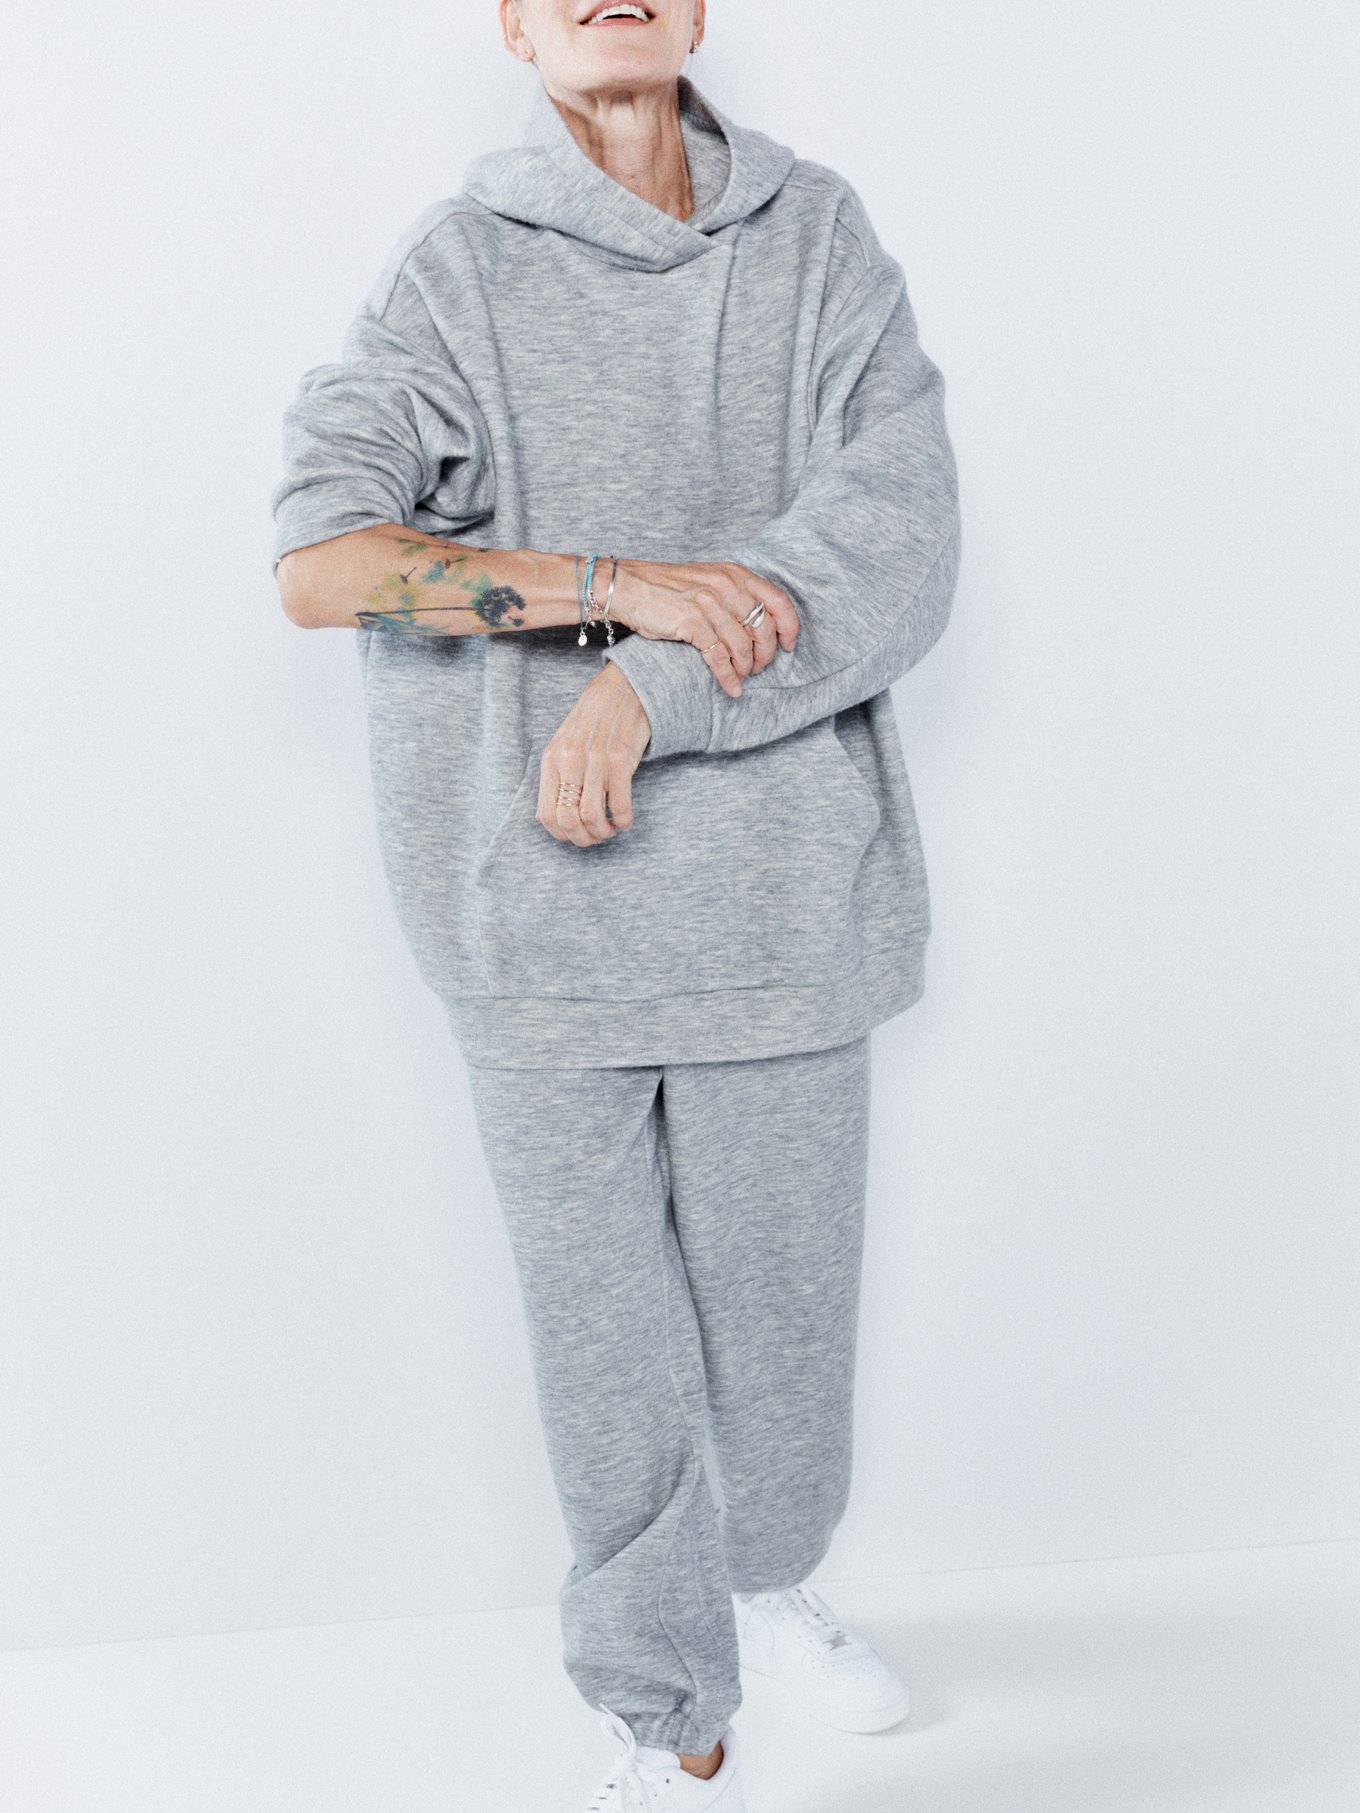 Grey Ribbed cashmere track pants